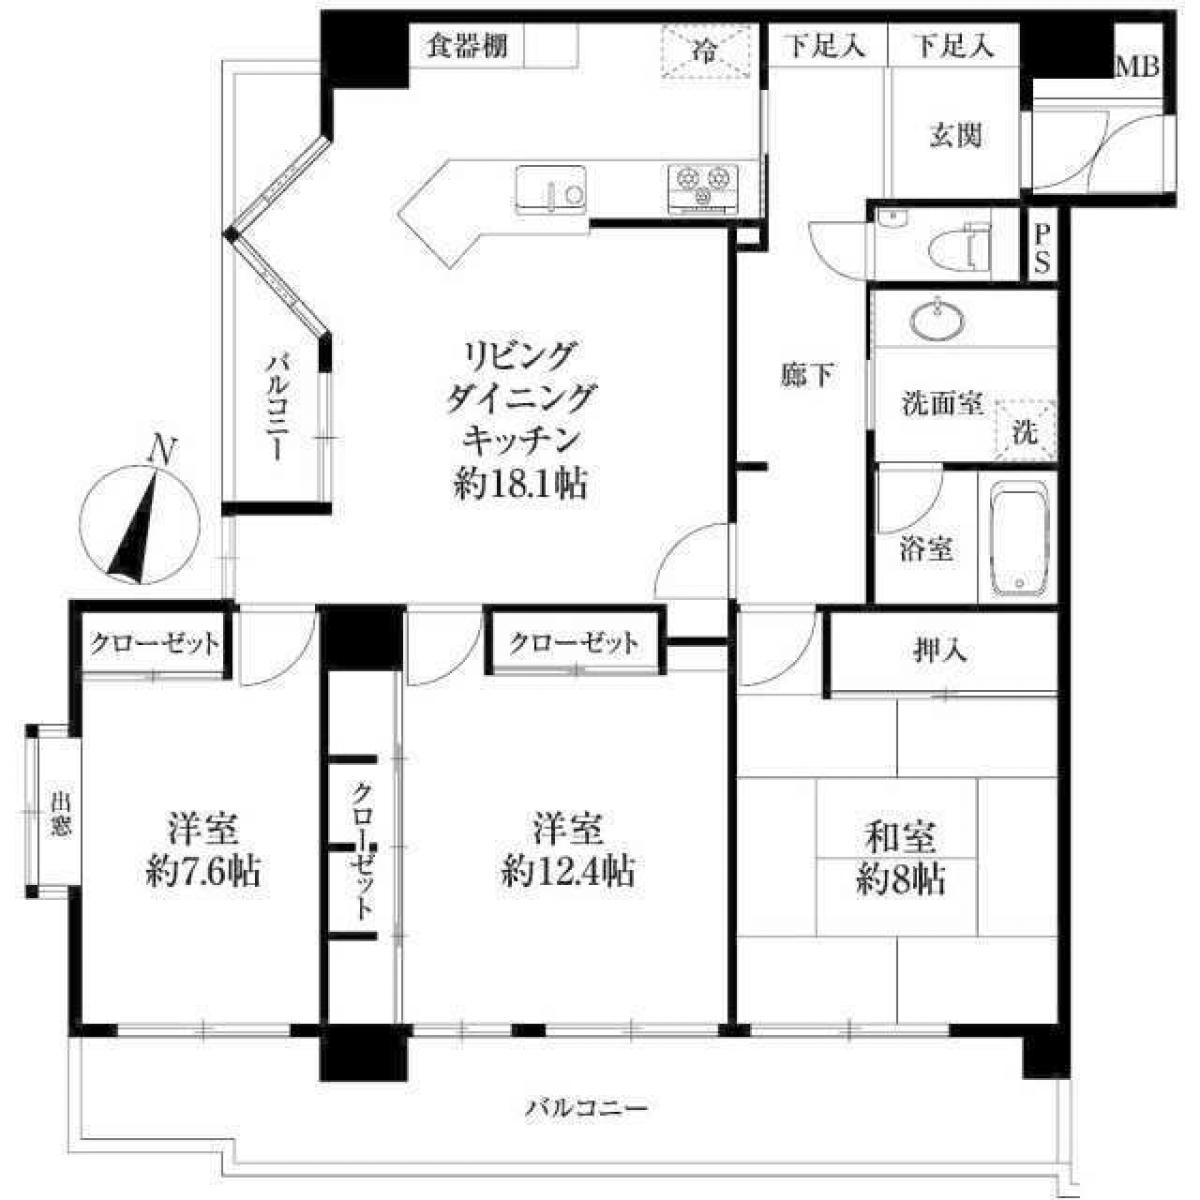 Picture of Apartment For Sale in Yamato Shi, Kanagawa, Japan